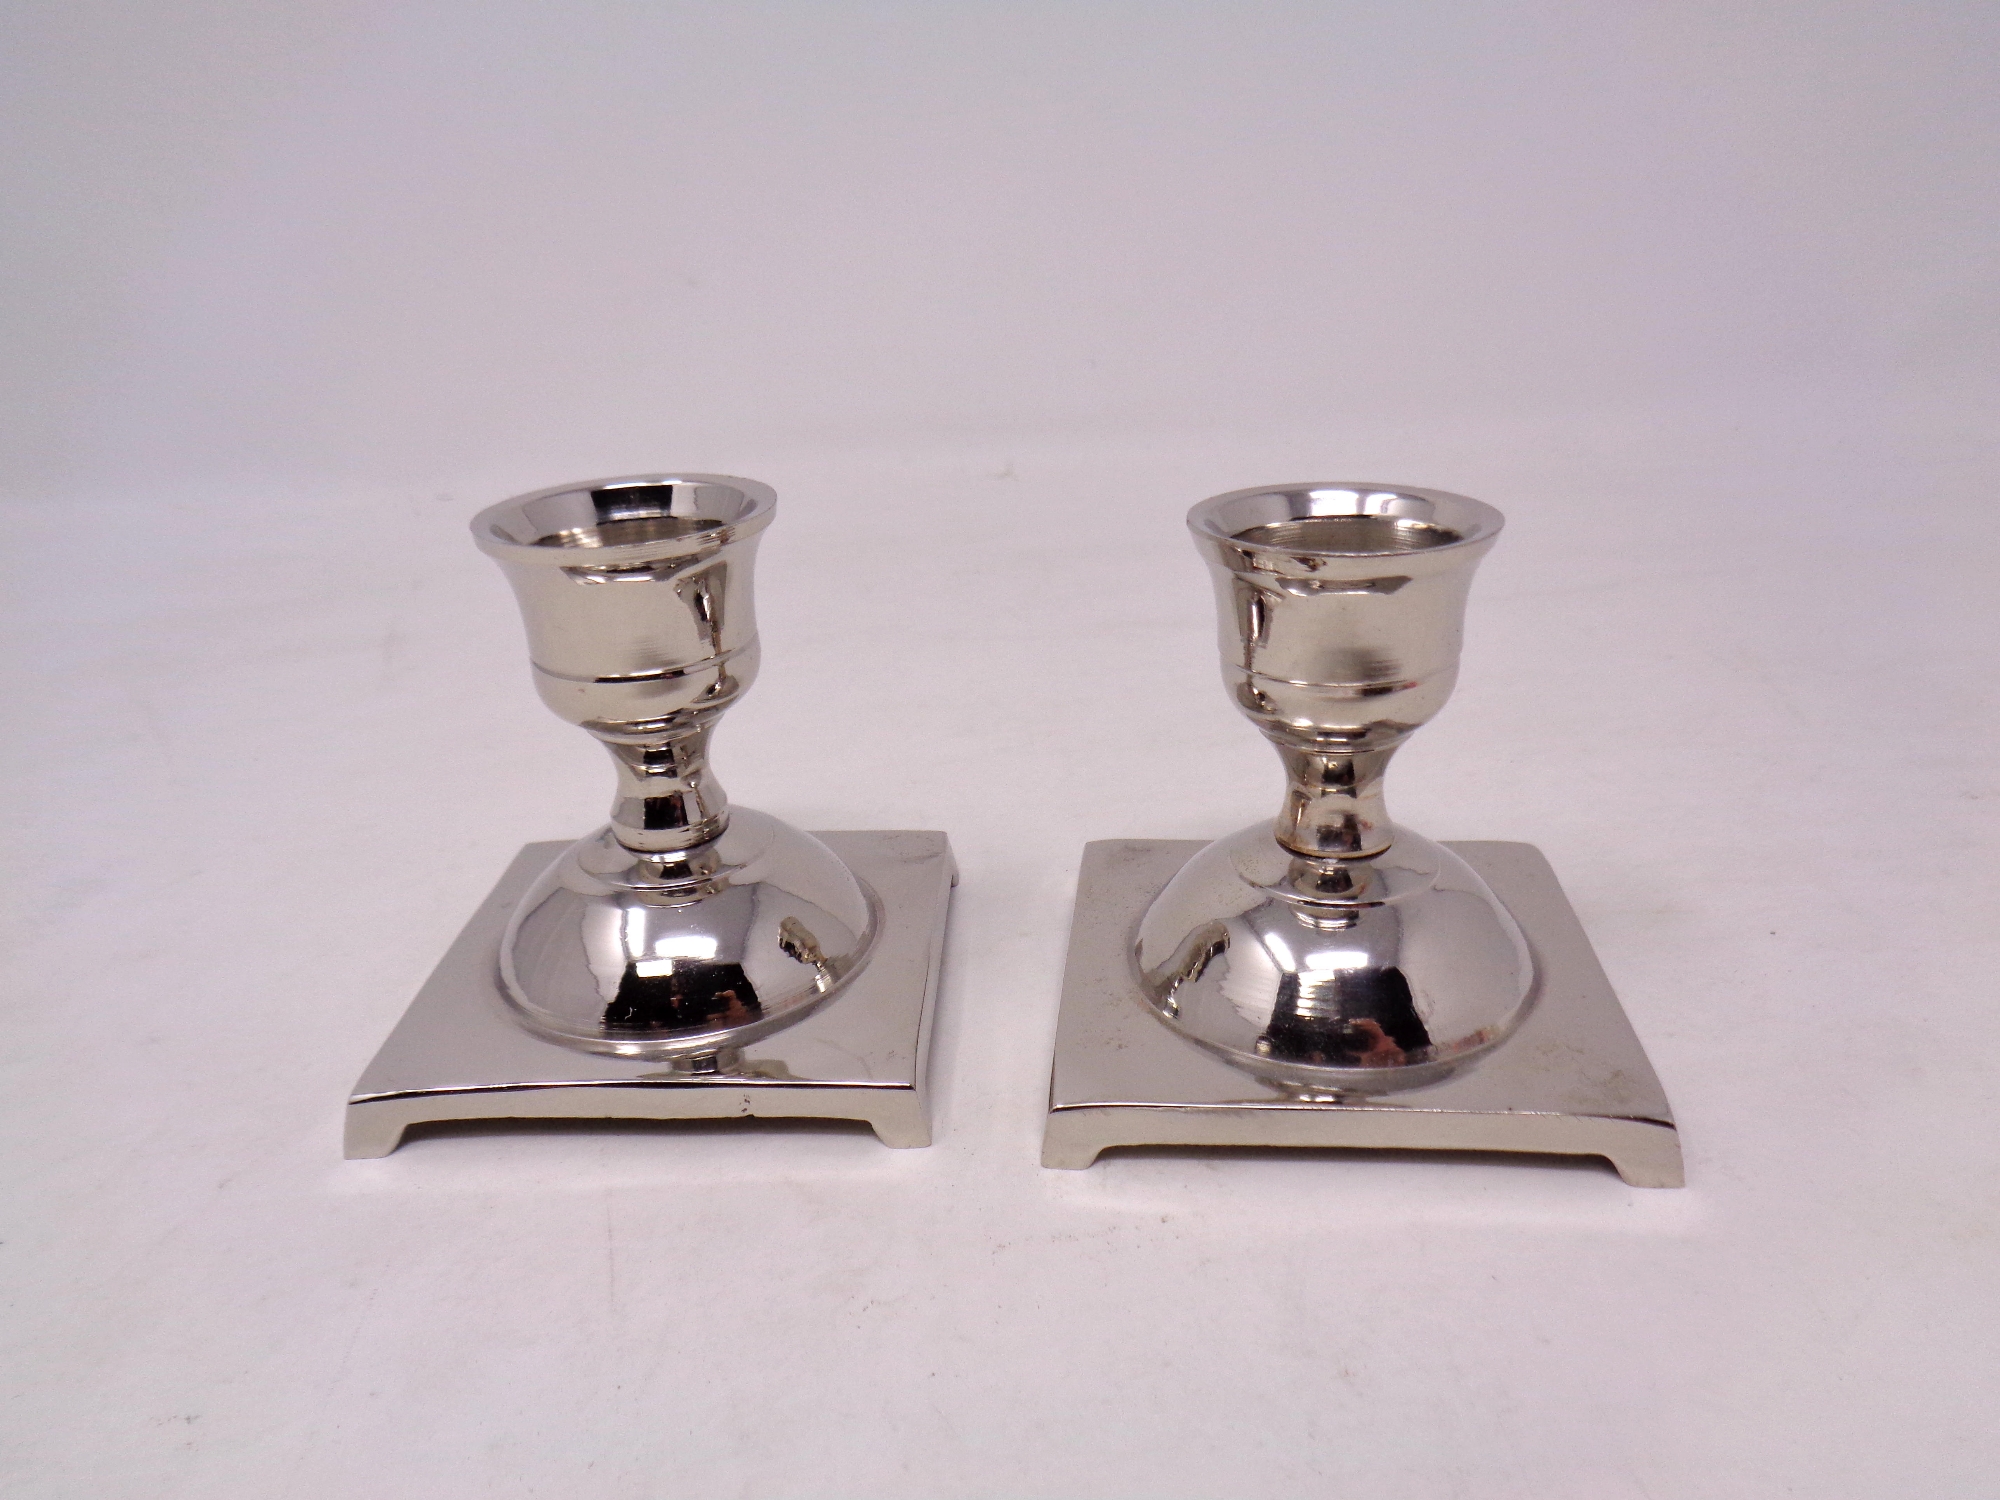 A pair of nickel plated brass candle holders